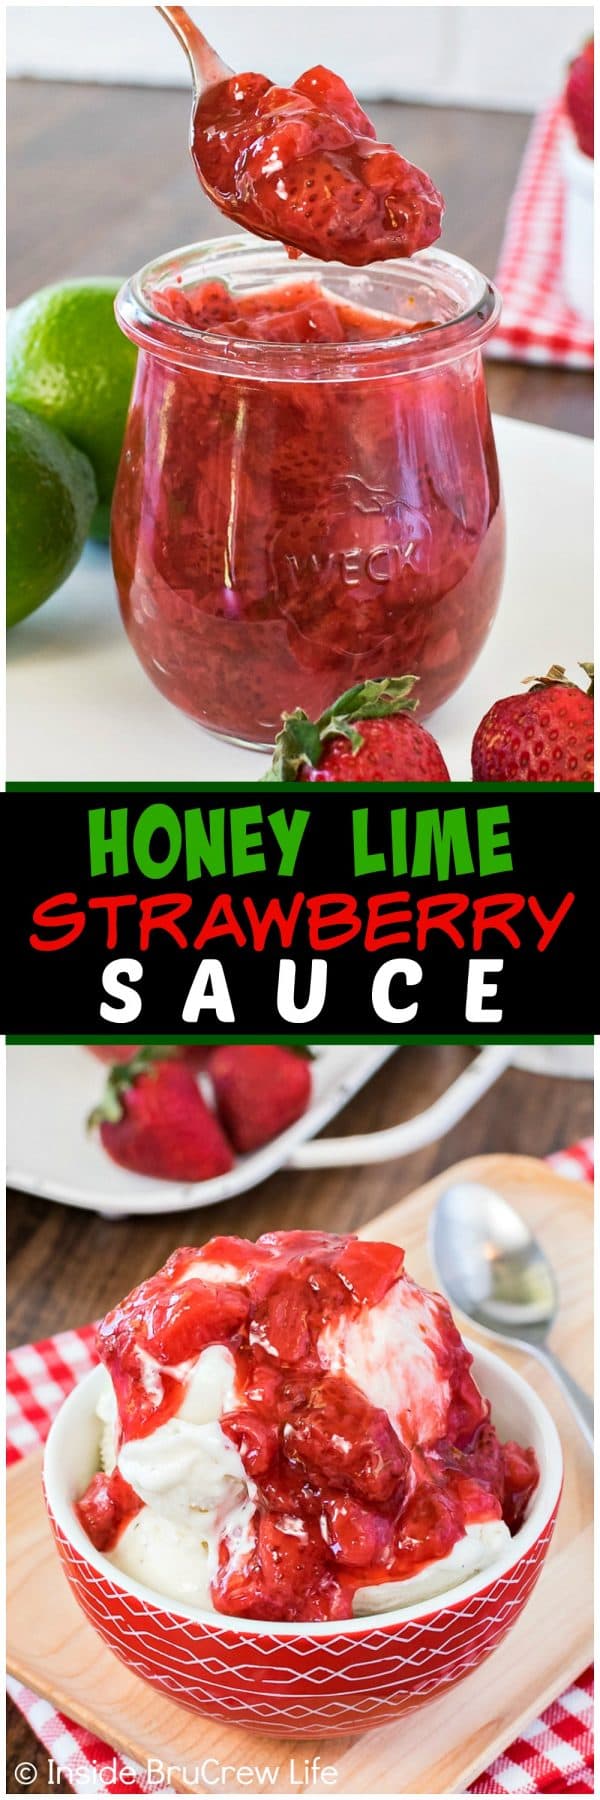 Honey Lime Strawberry Sauce - this easy fruit topping is made with a few ingredients. It's a great recipe to add to the top of cakes, ice cream, or cheesecake.